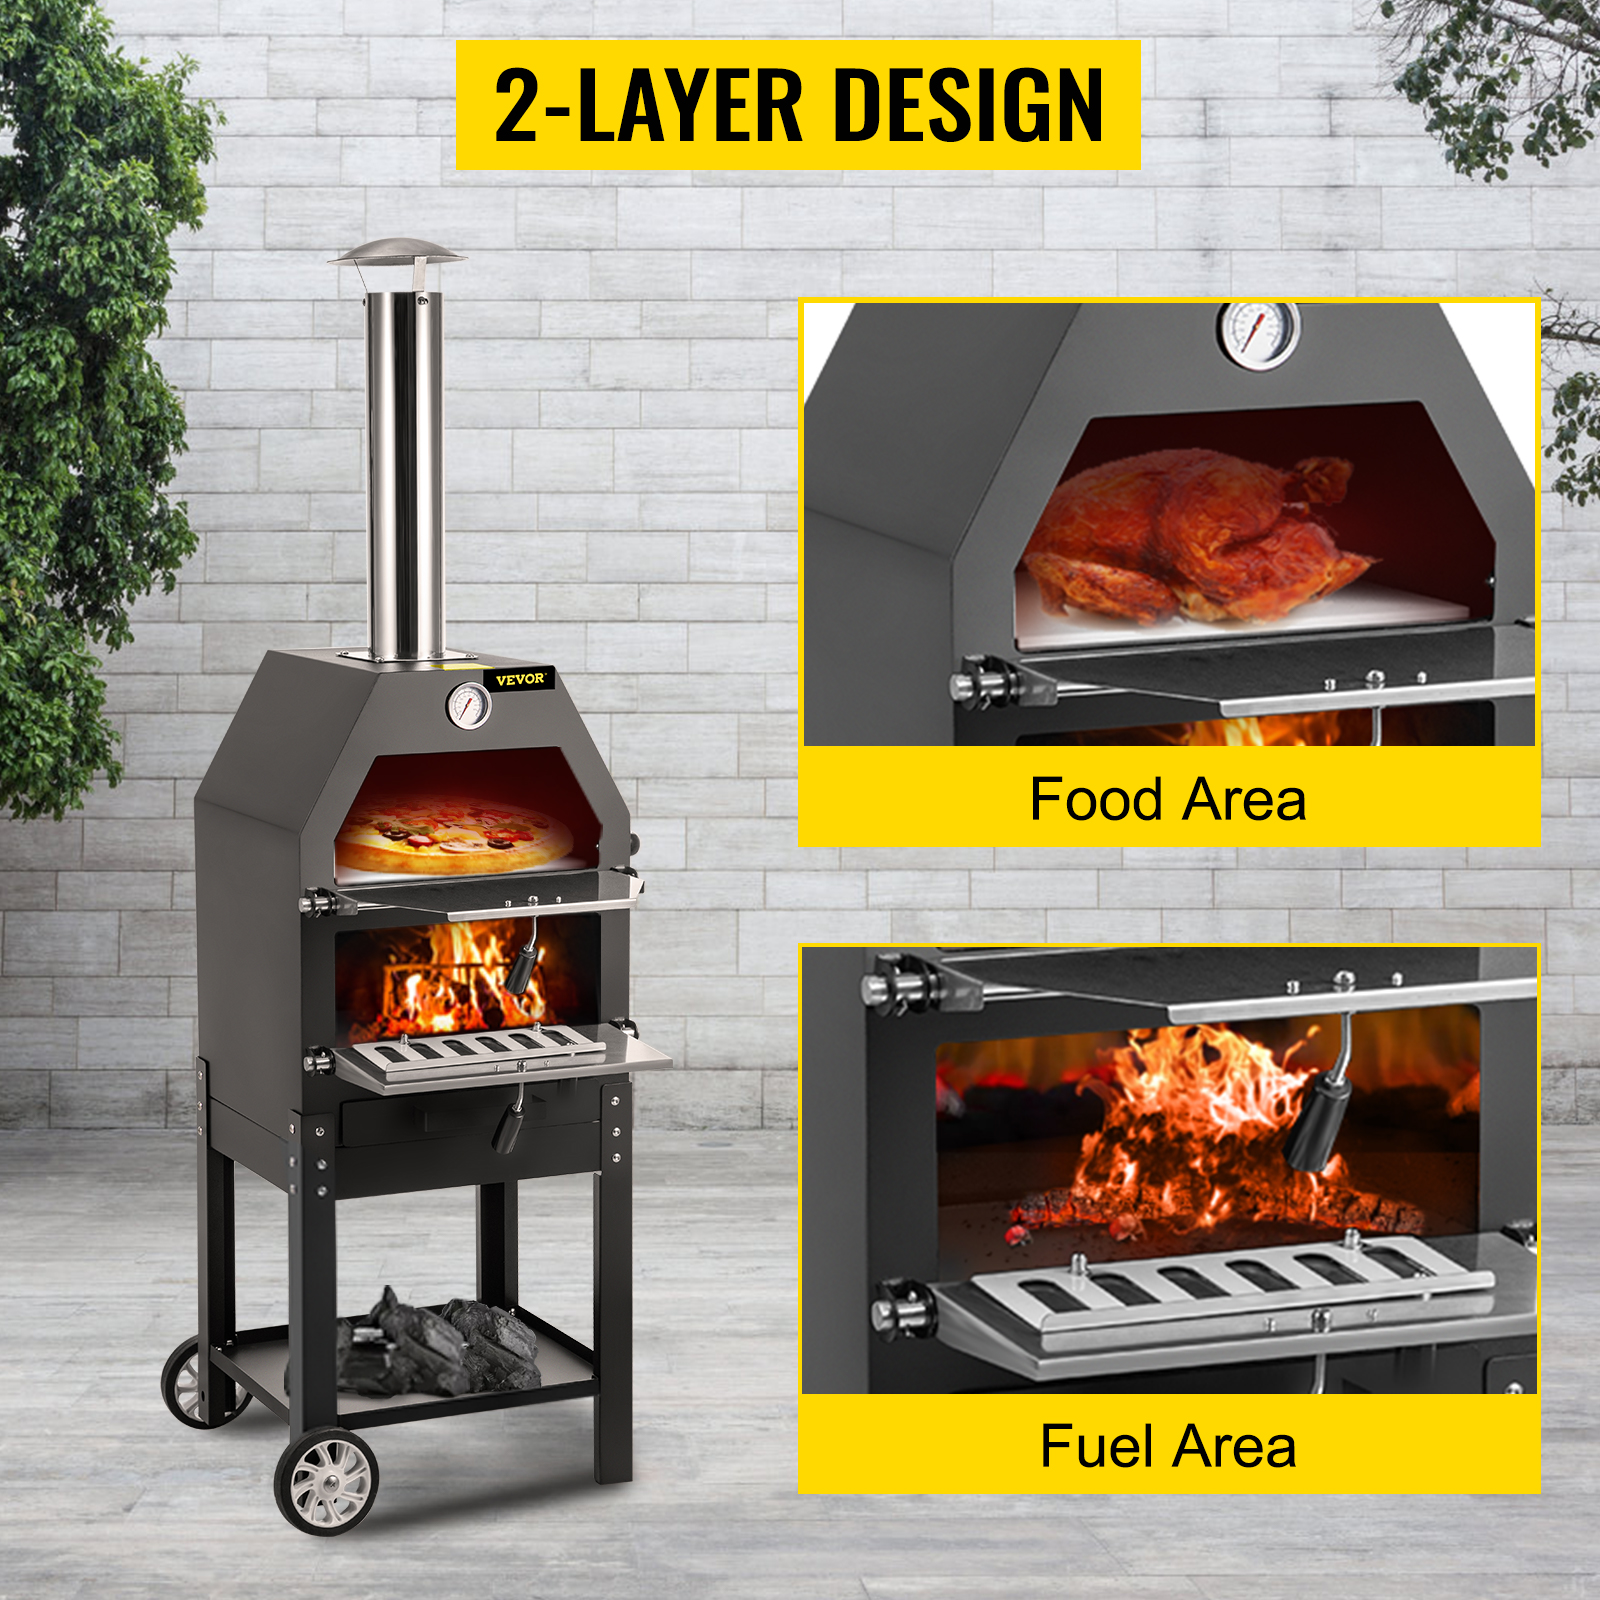 VEVOR Outdoor Pizza Oven 12,Wood Fire with Waterproof Cover,2-Layer Pizza Oven Wood Fired,Wood Burning Outdoor Pizza Oven w/ 2 Removable Wheels,Wood Fired Pizza Maker Ovens w/ 700℉ Max Temperature. 